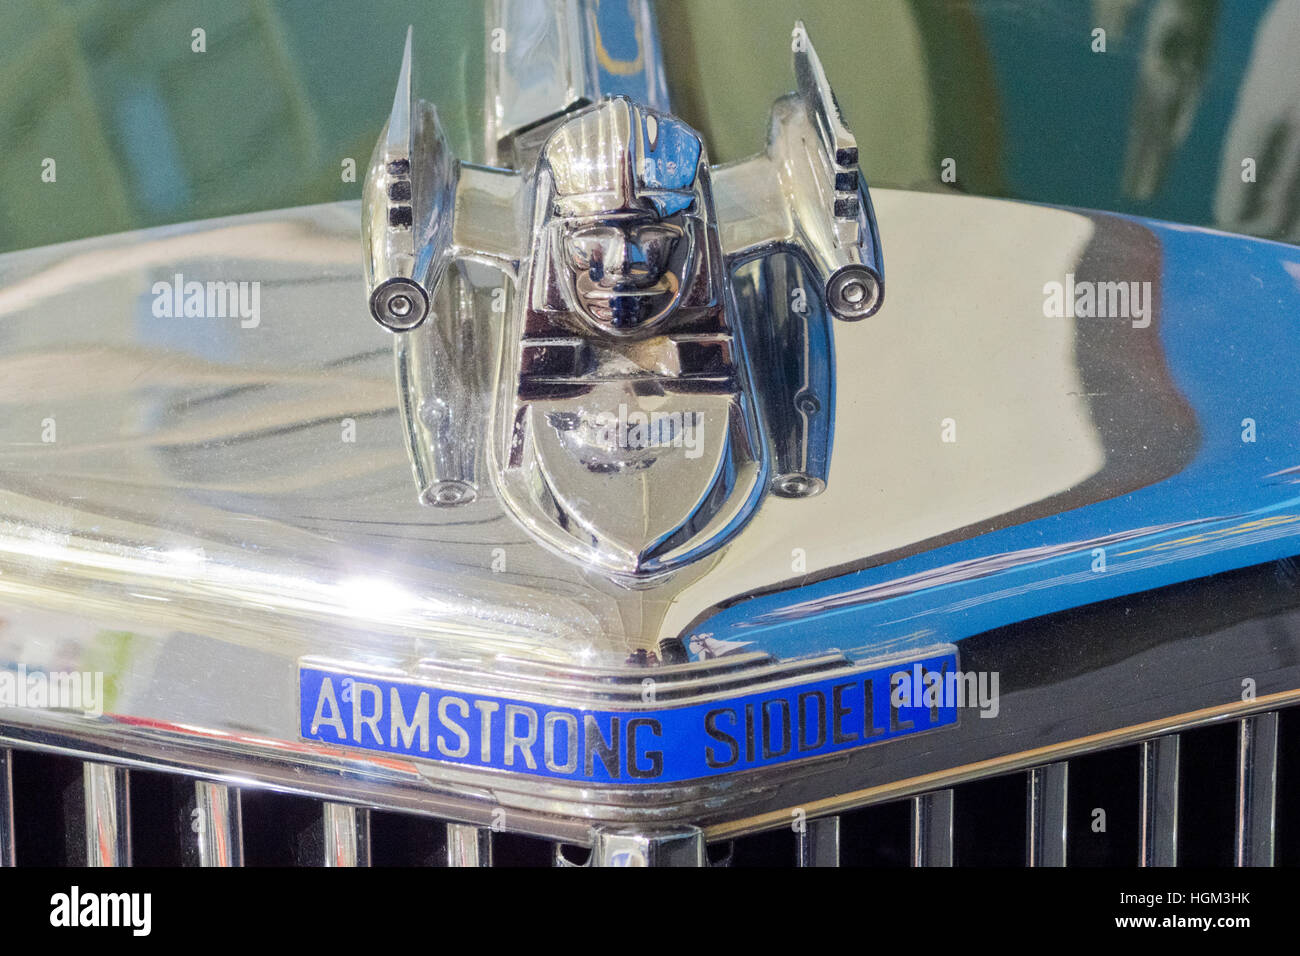 Armstrong Siddeley 1955 345 Sapphire Car Chrome Radiator Grille and Sphinx Mascot, UK Stock Photo